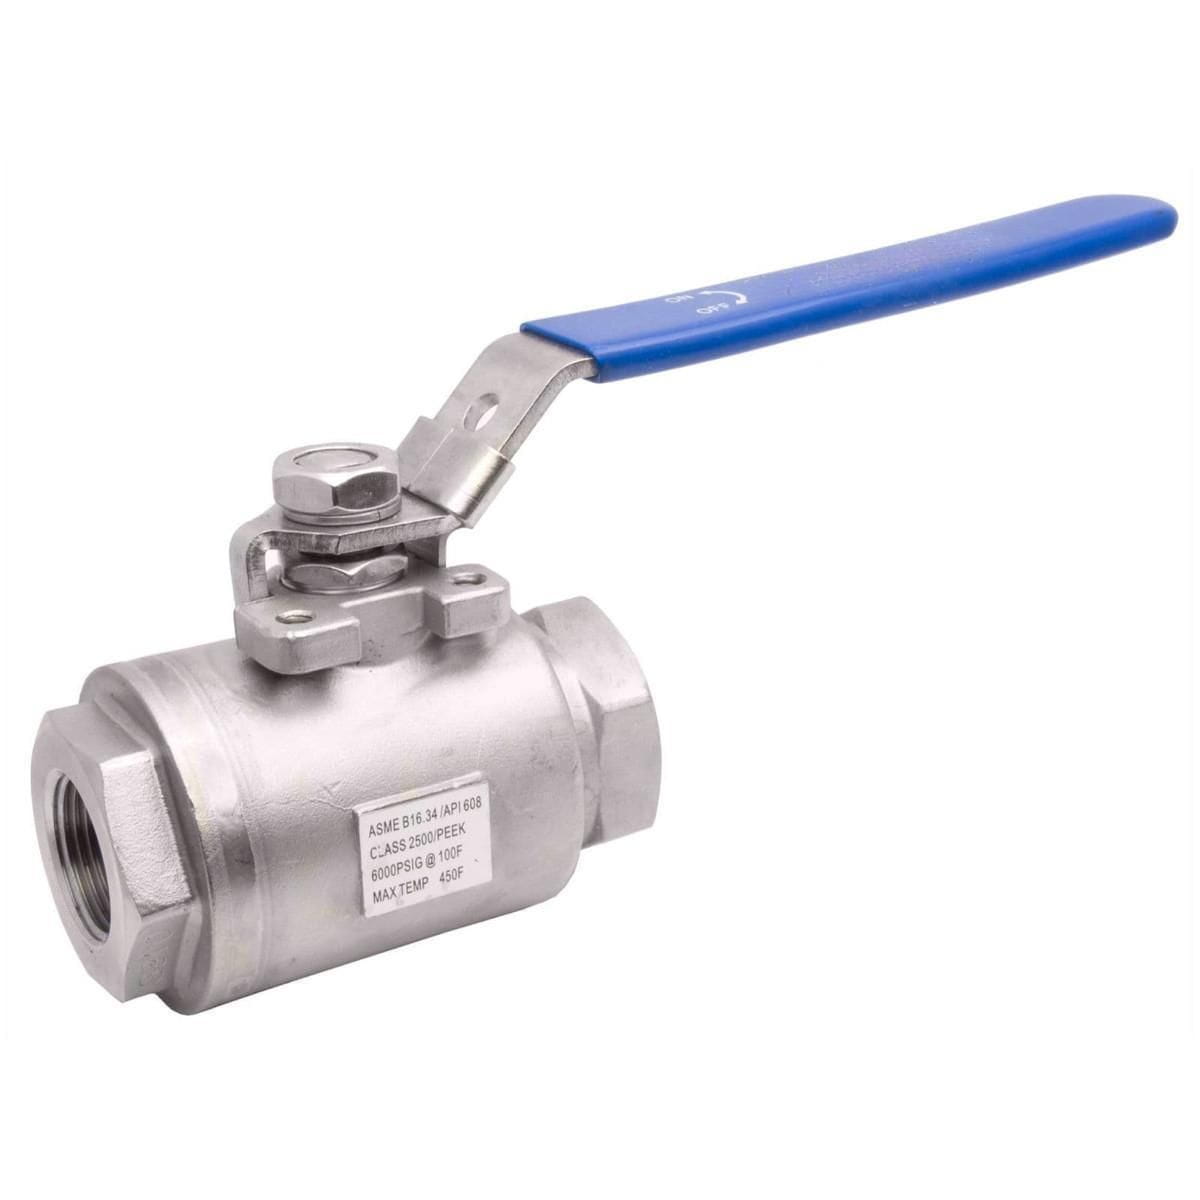 ASTM A351 CF8M Ball Valve, Stainless Steel, 1/2 IN, 6000 PSI